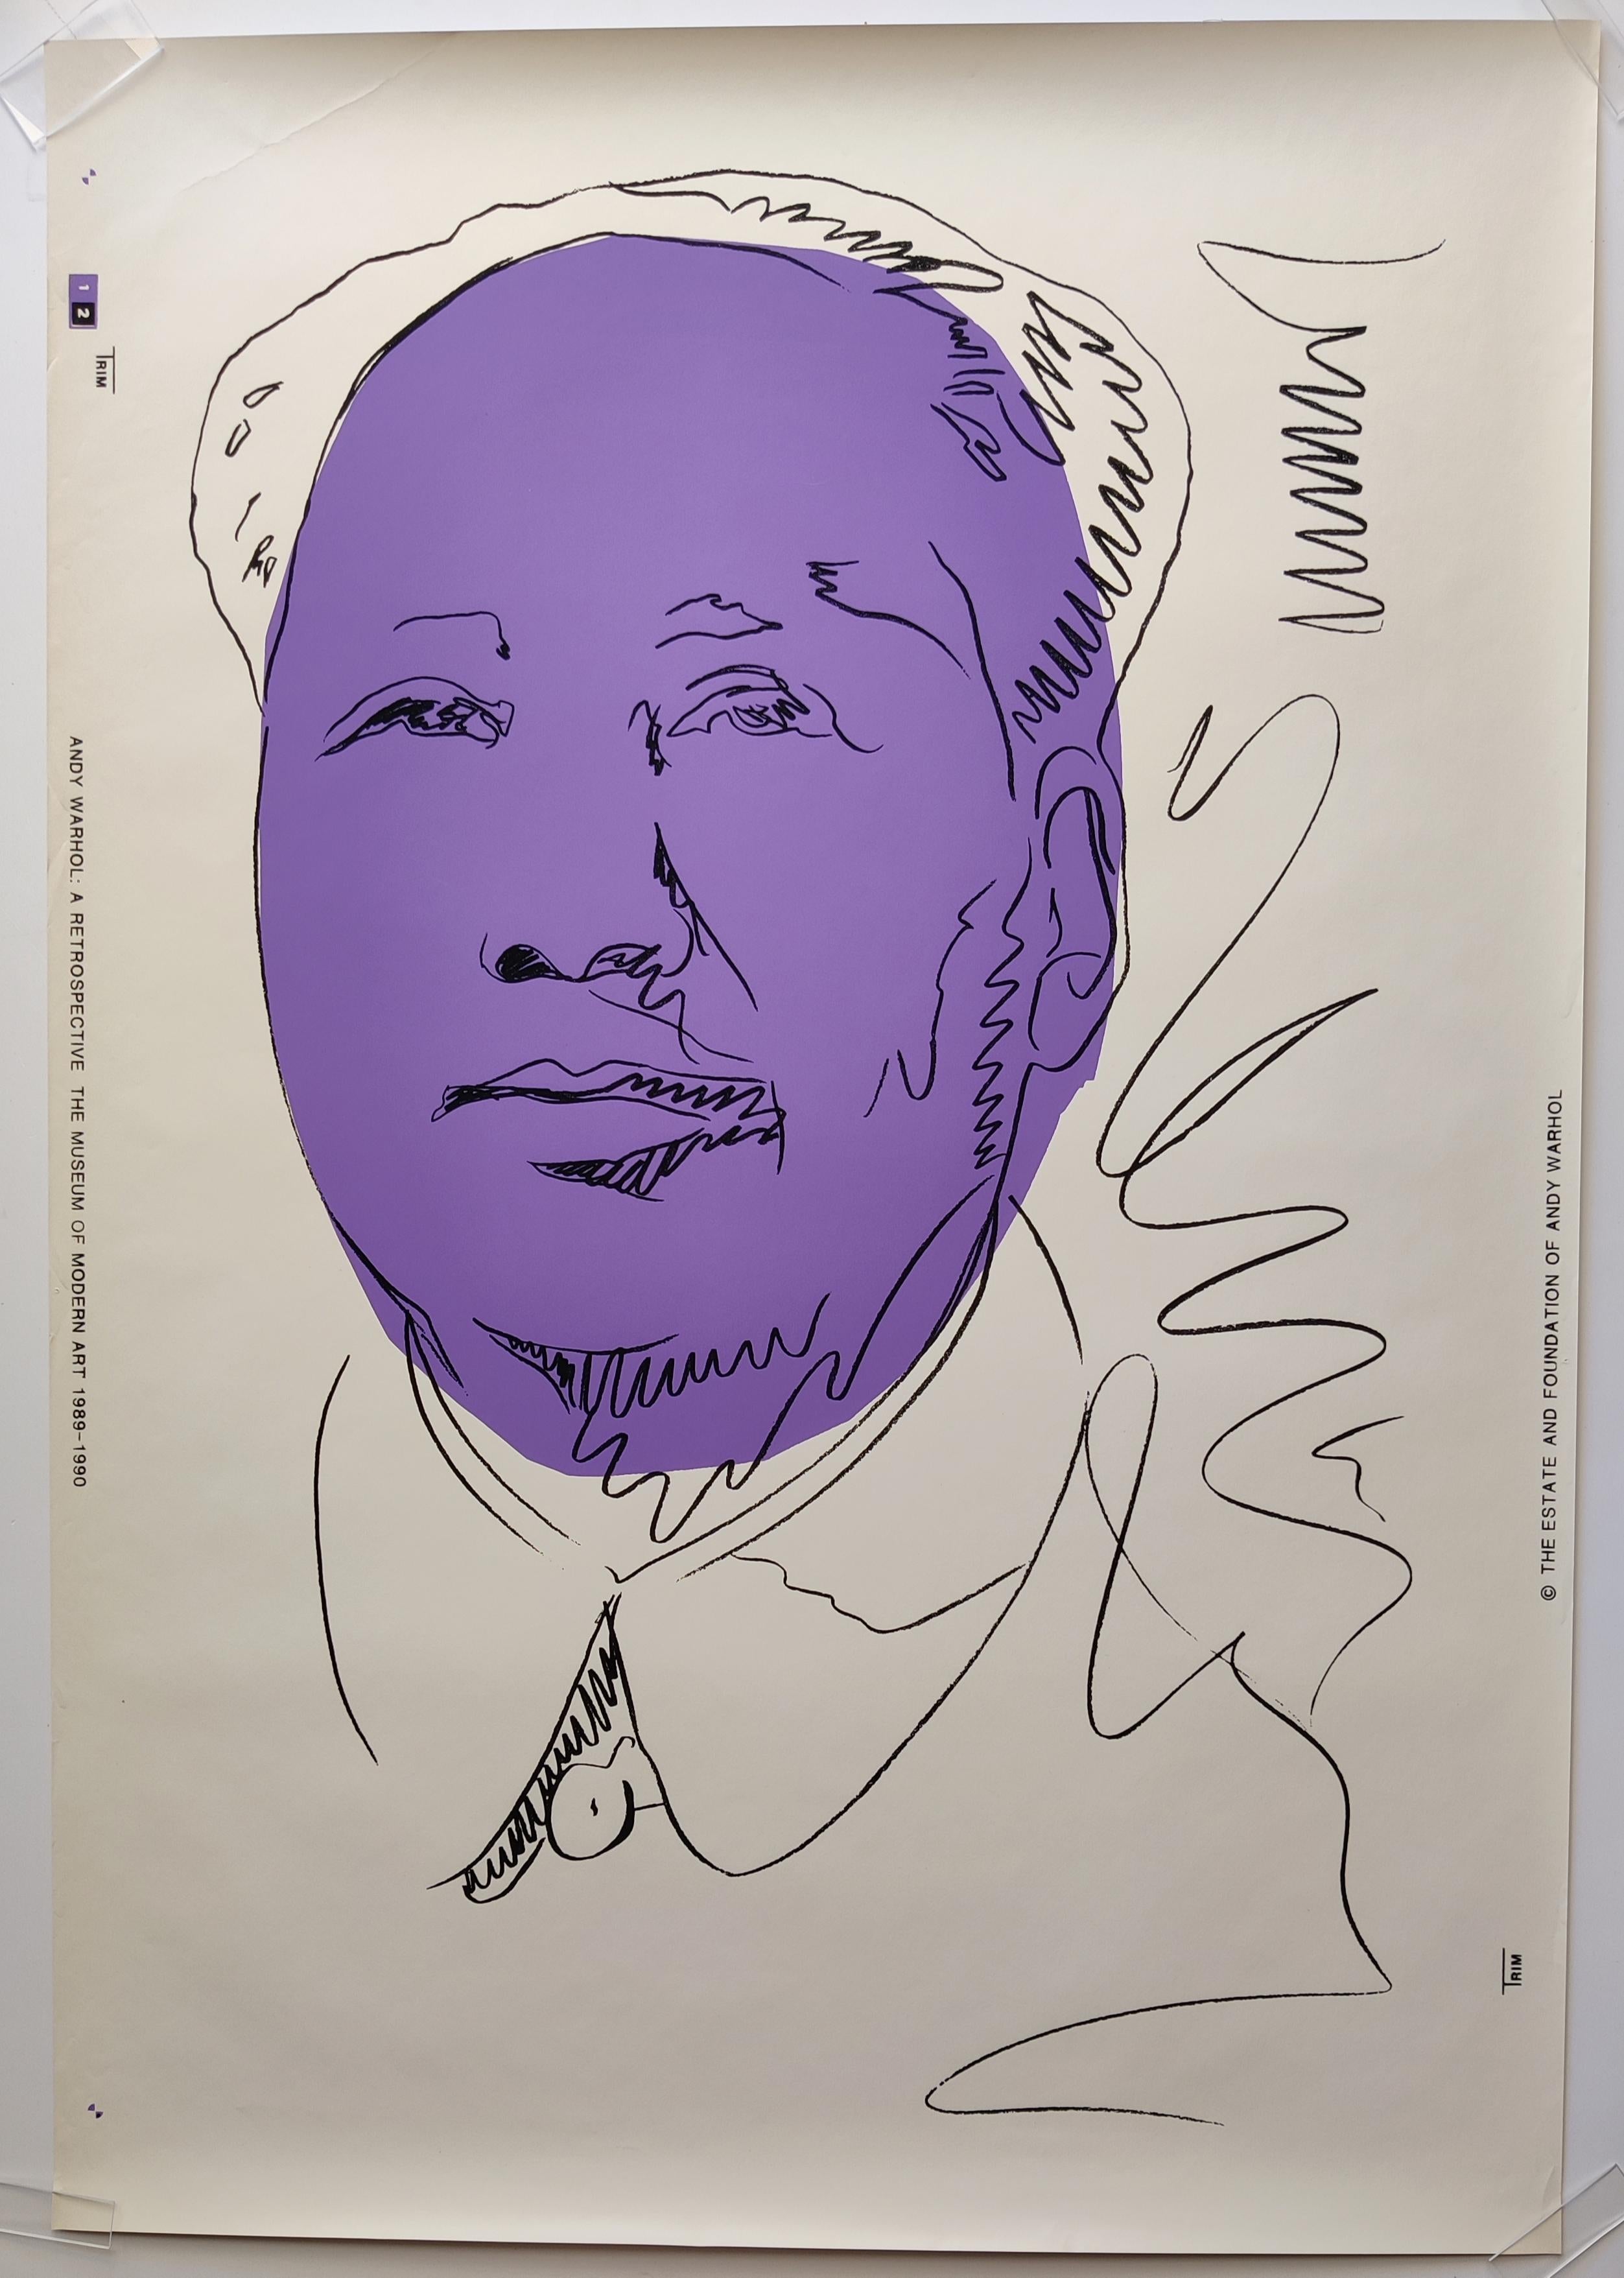 Andy Warhol
Mao (Wallpaper). 1974 (printed 1989)
Color screenprint on wallpaper
Sheet size: 108 x 75 cm, full margins. 
Published by the Museum of Modern Art, New York, in conjunction with "Andy Warhol: A Retrospective," February 6-May 2, 1989
A